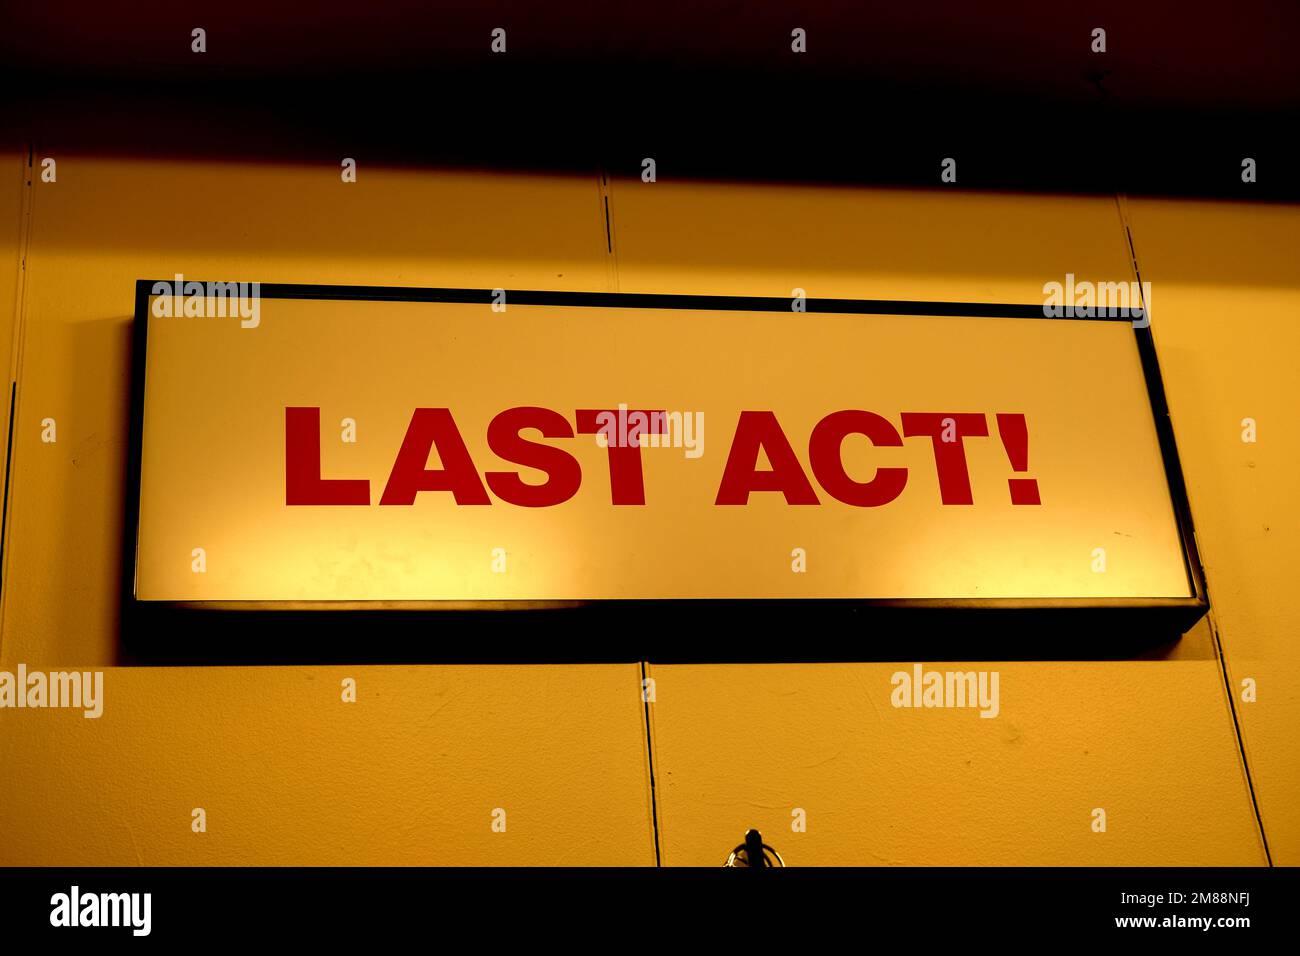 Interior sign at a Macy's Department store where last chance bargains can be found; Last Act!; end of the road, the end, no more, death concept. Stock Photo